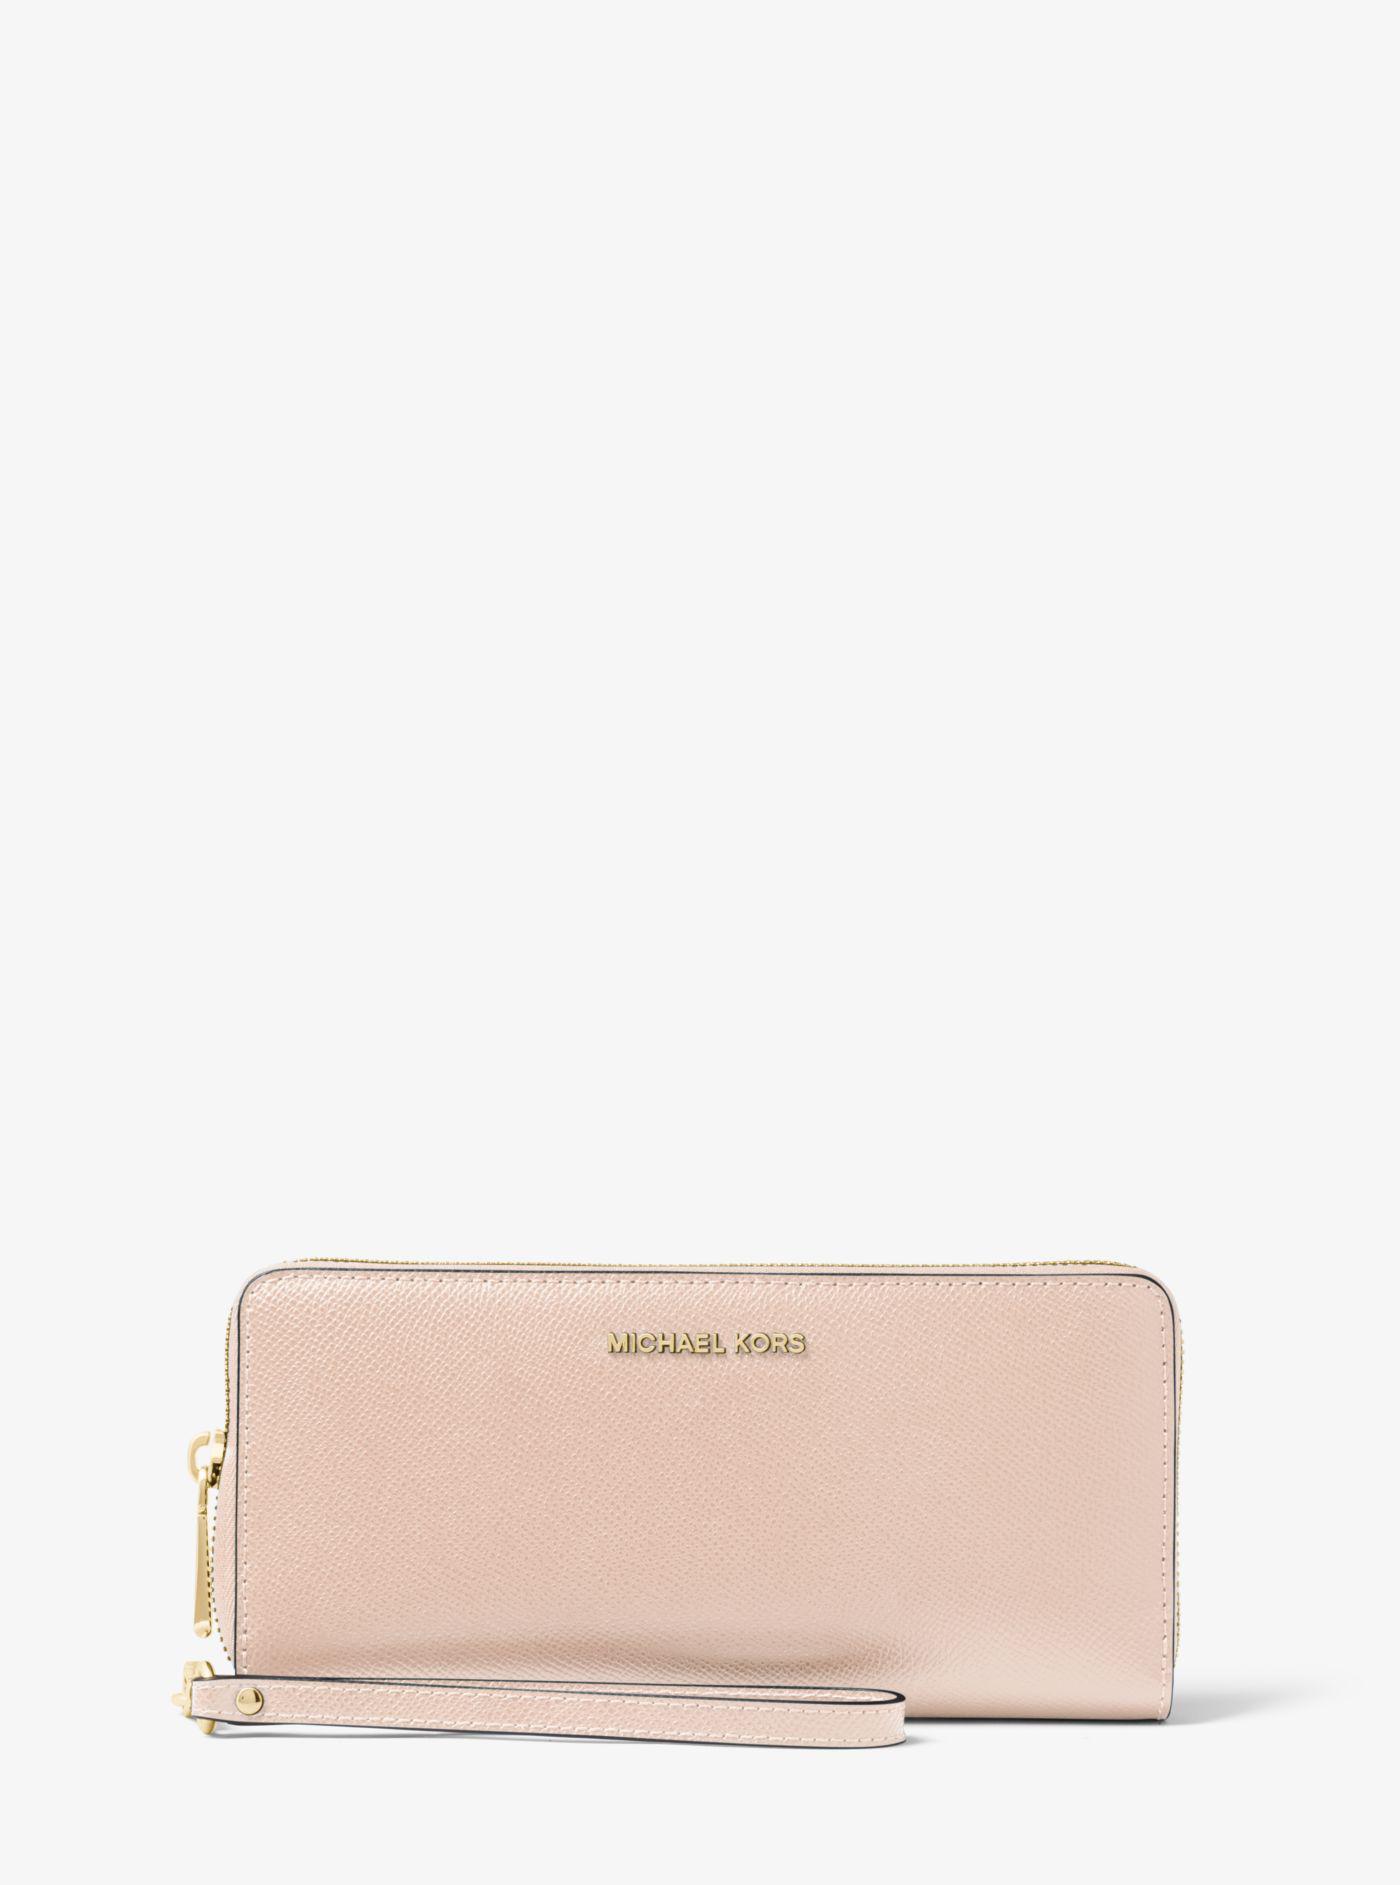 Michael Kors Leather Continental Wristlet in Pink - Lyst